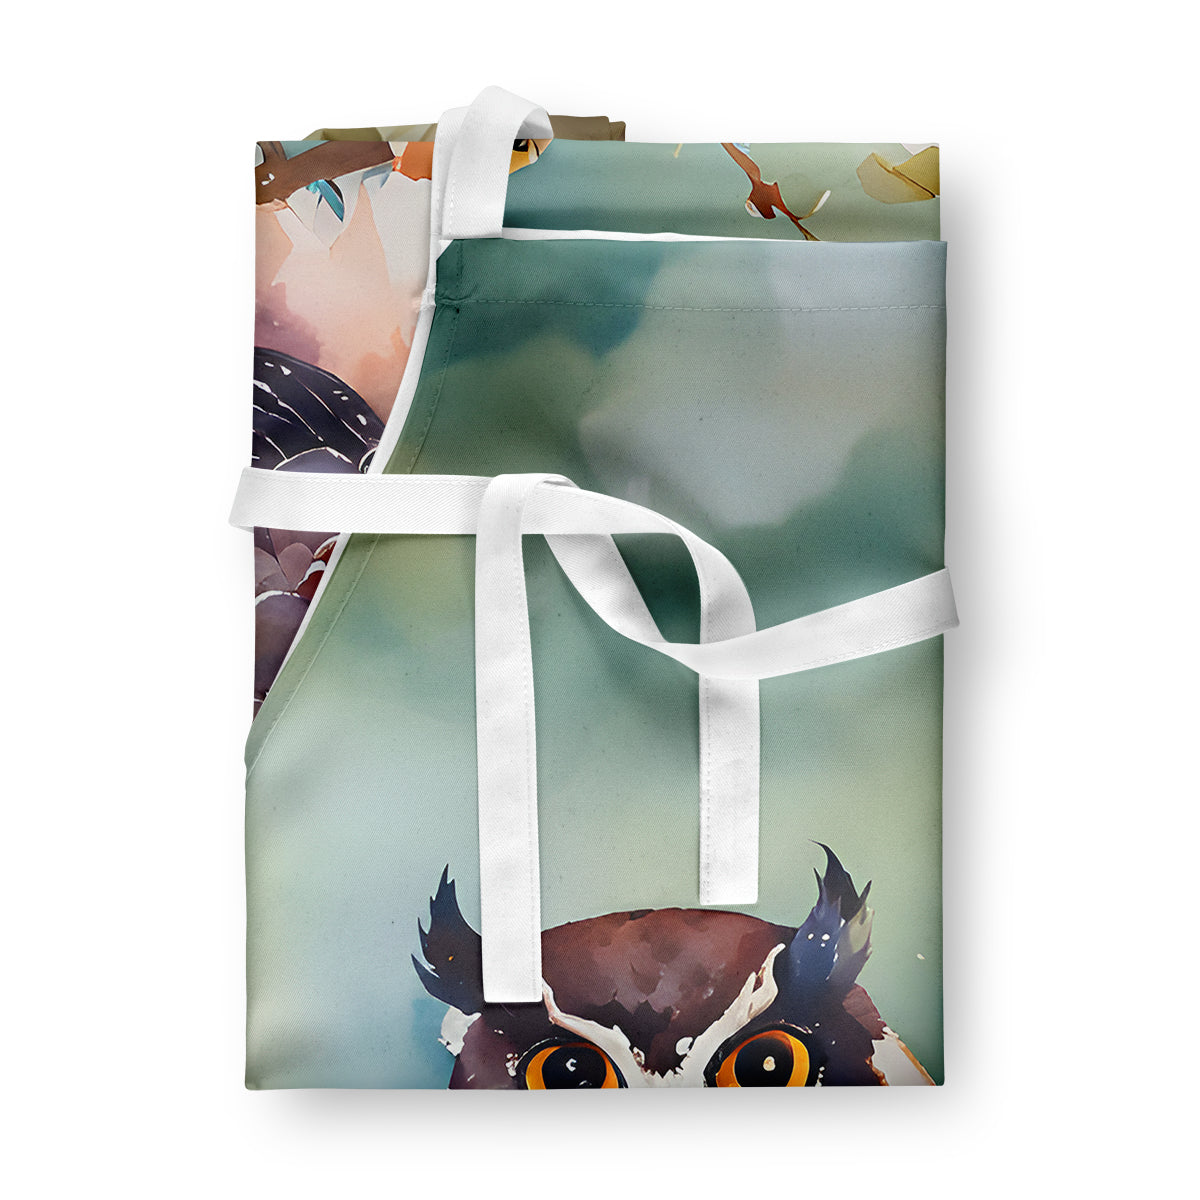 Spectacled Owl Apron